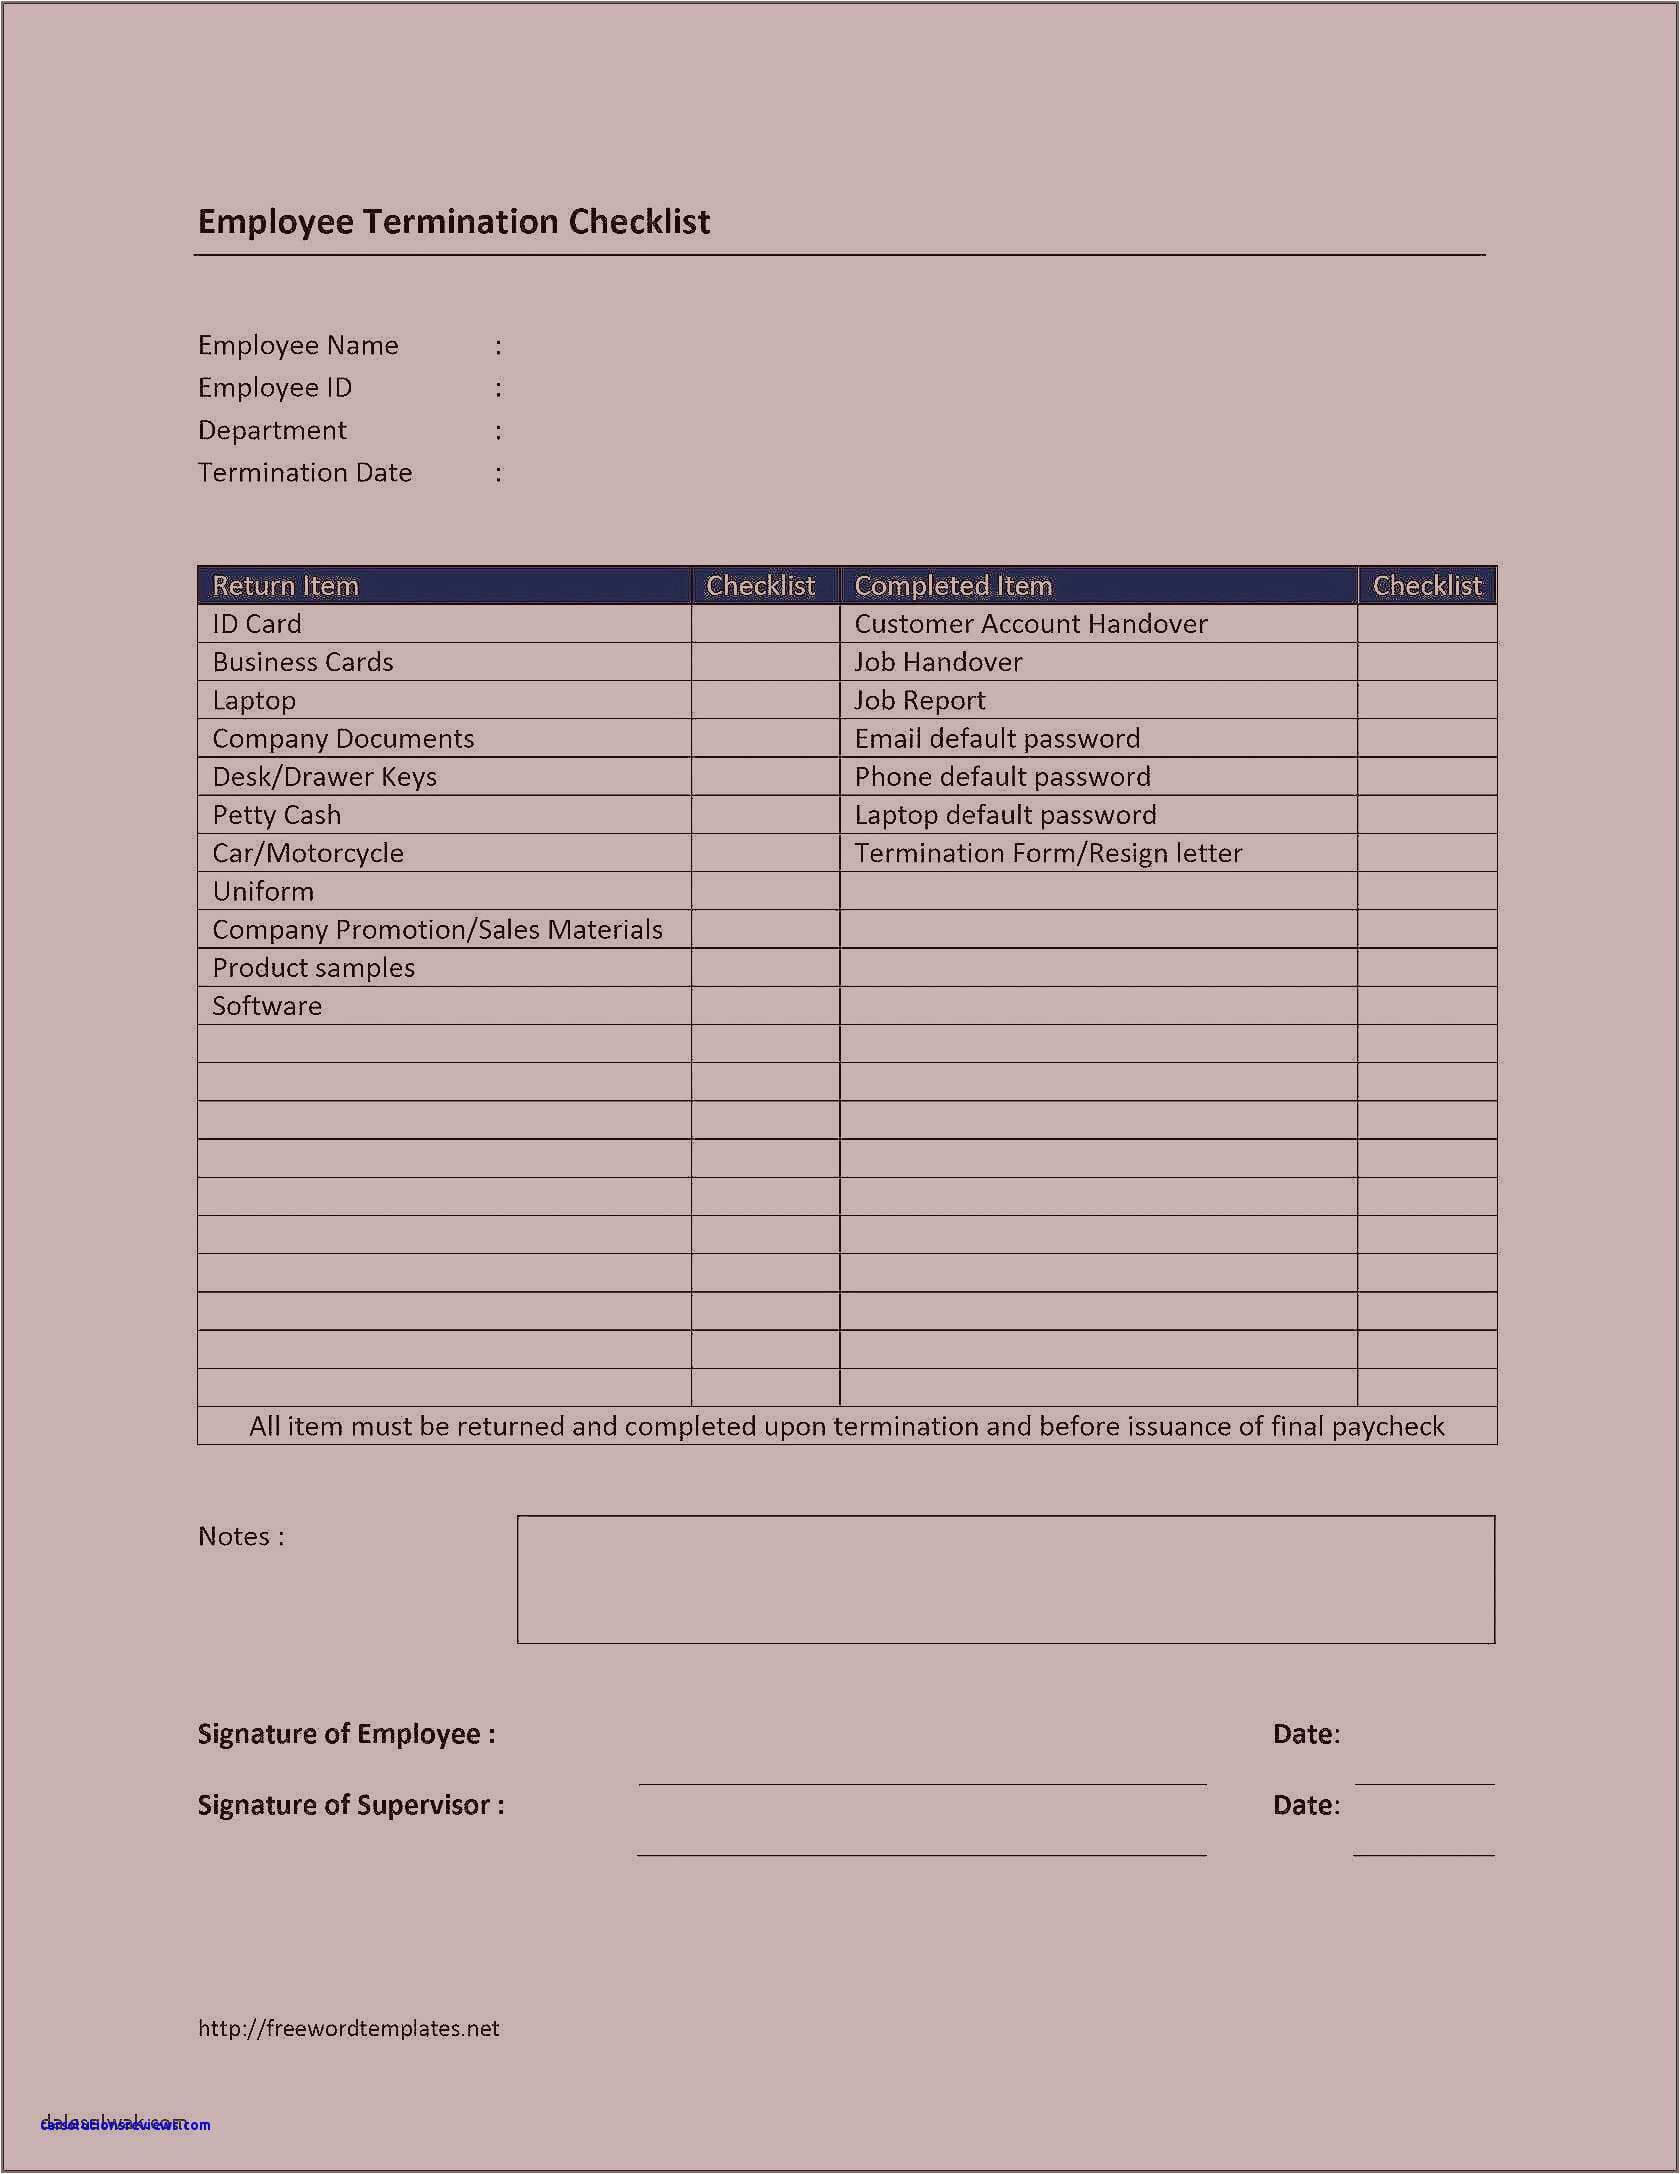 Reporting Requirements Template Excel Spreadsheet | Glendale Inside Report Requirements Template